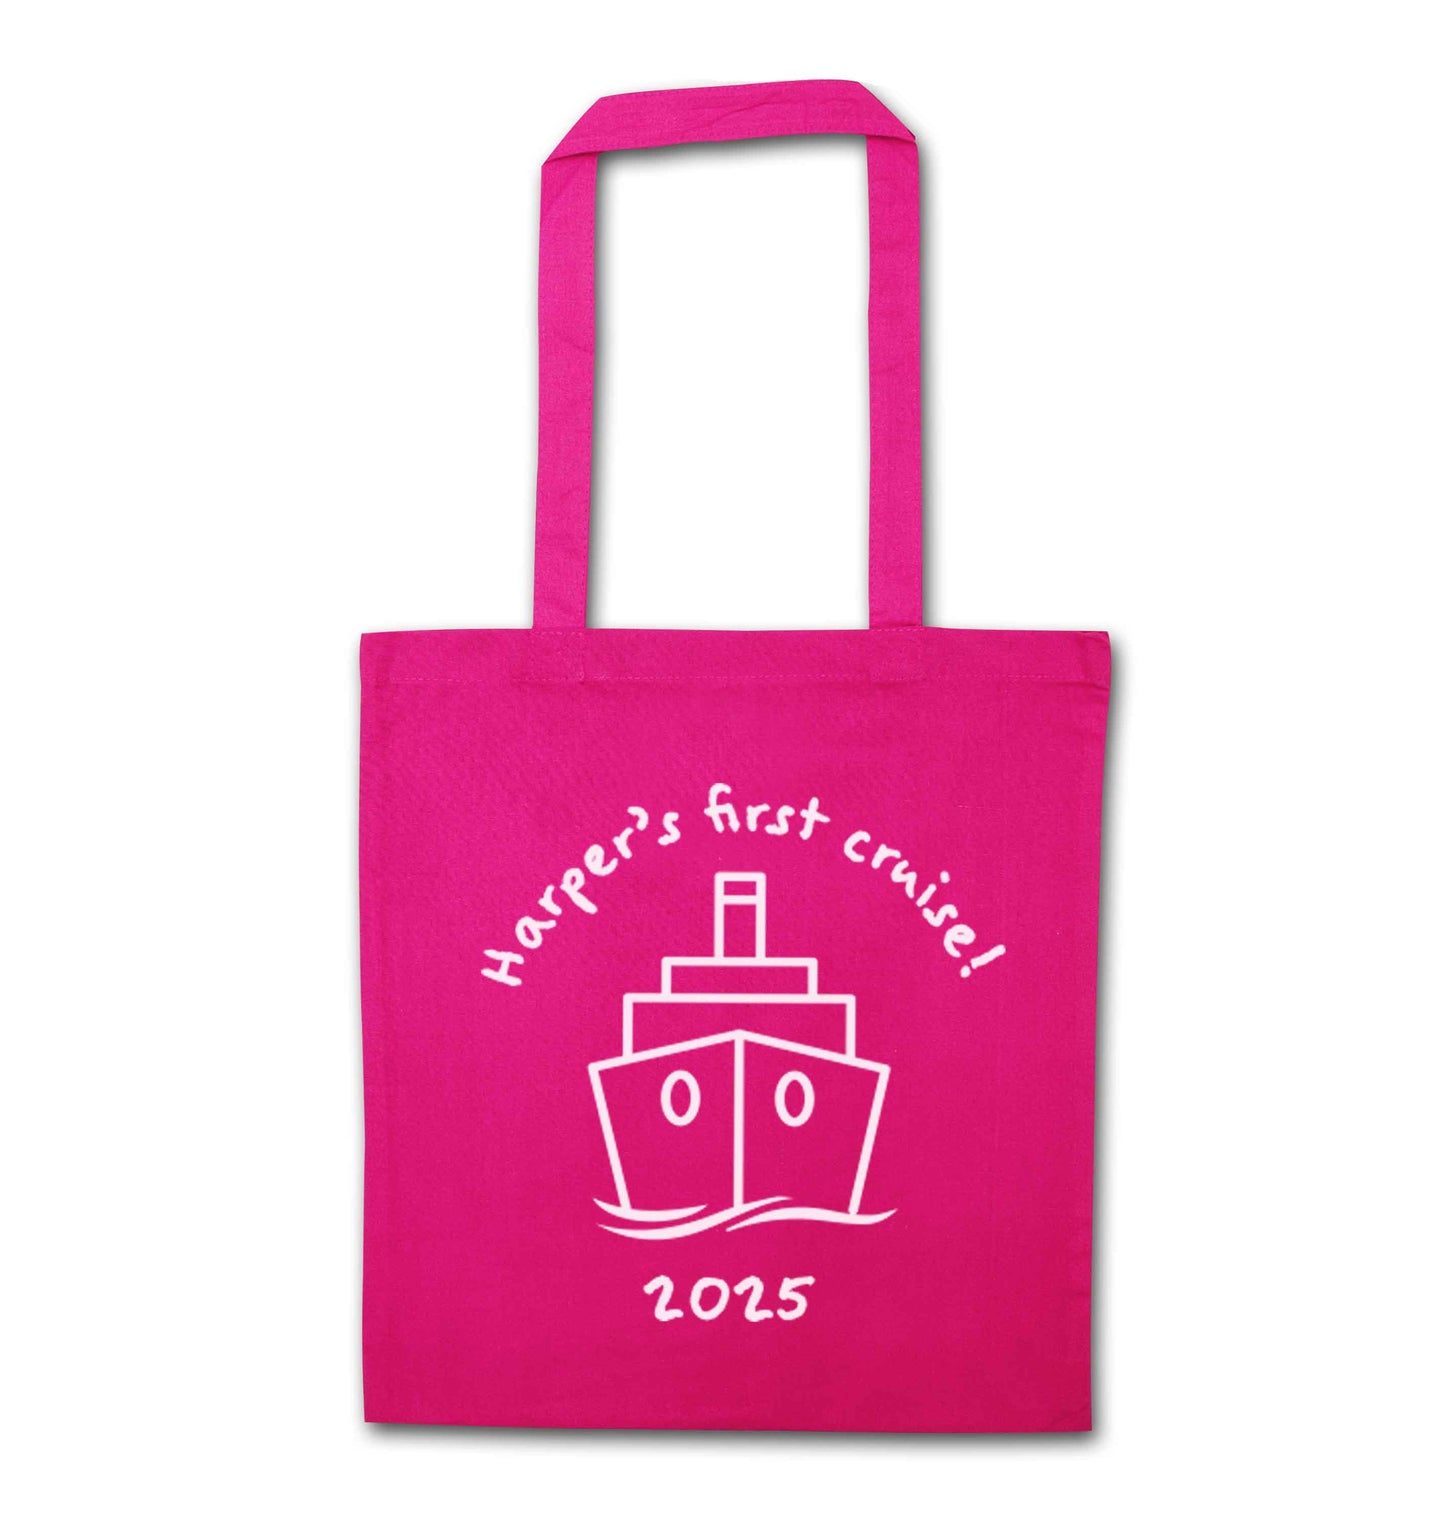 Personalised first cruise pink tote bag